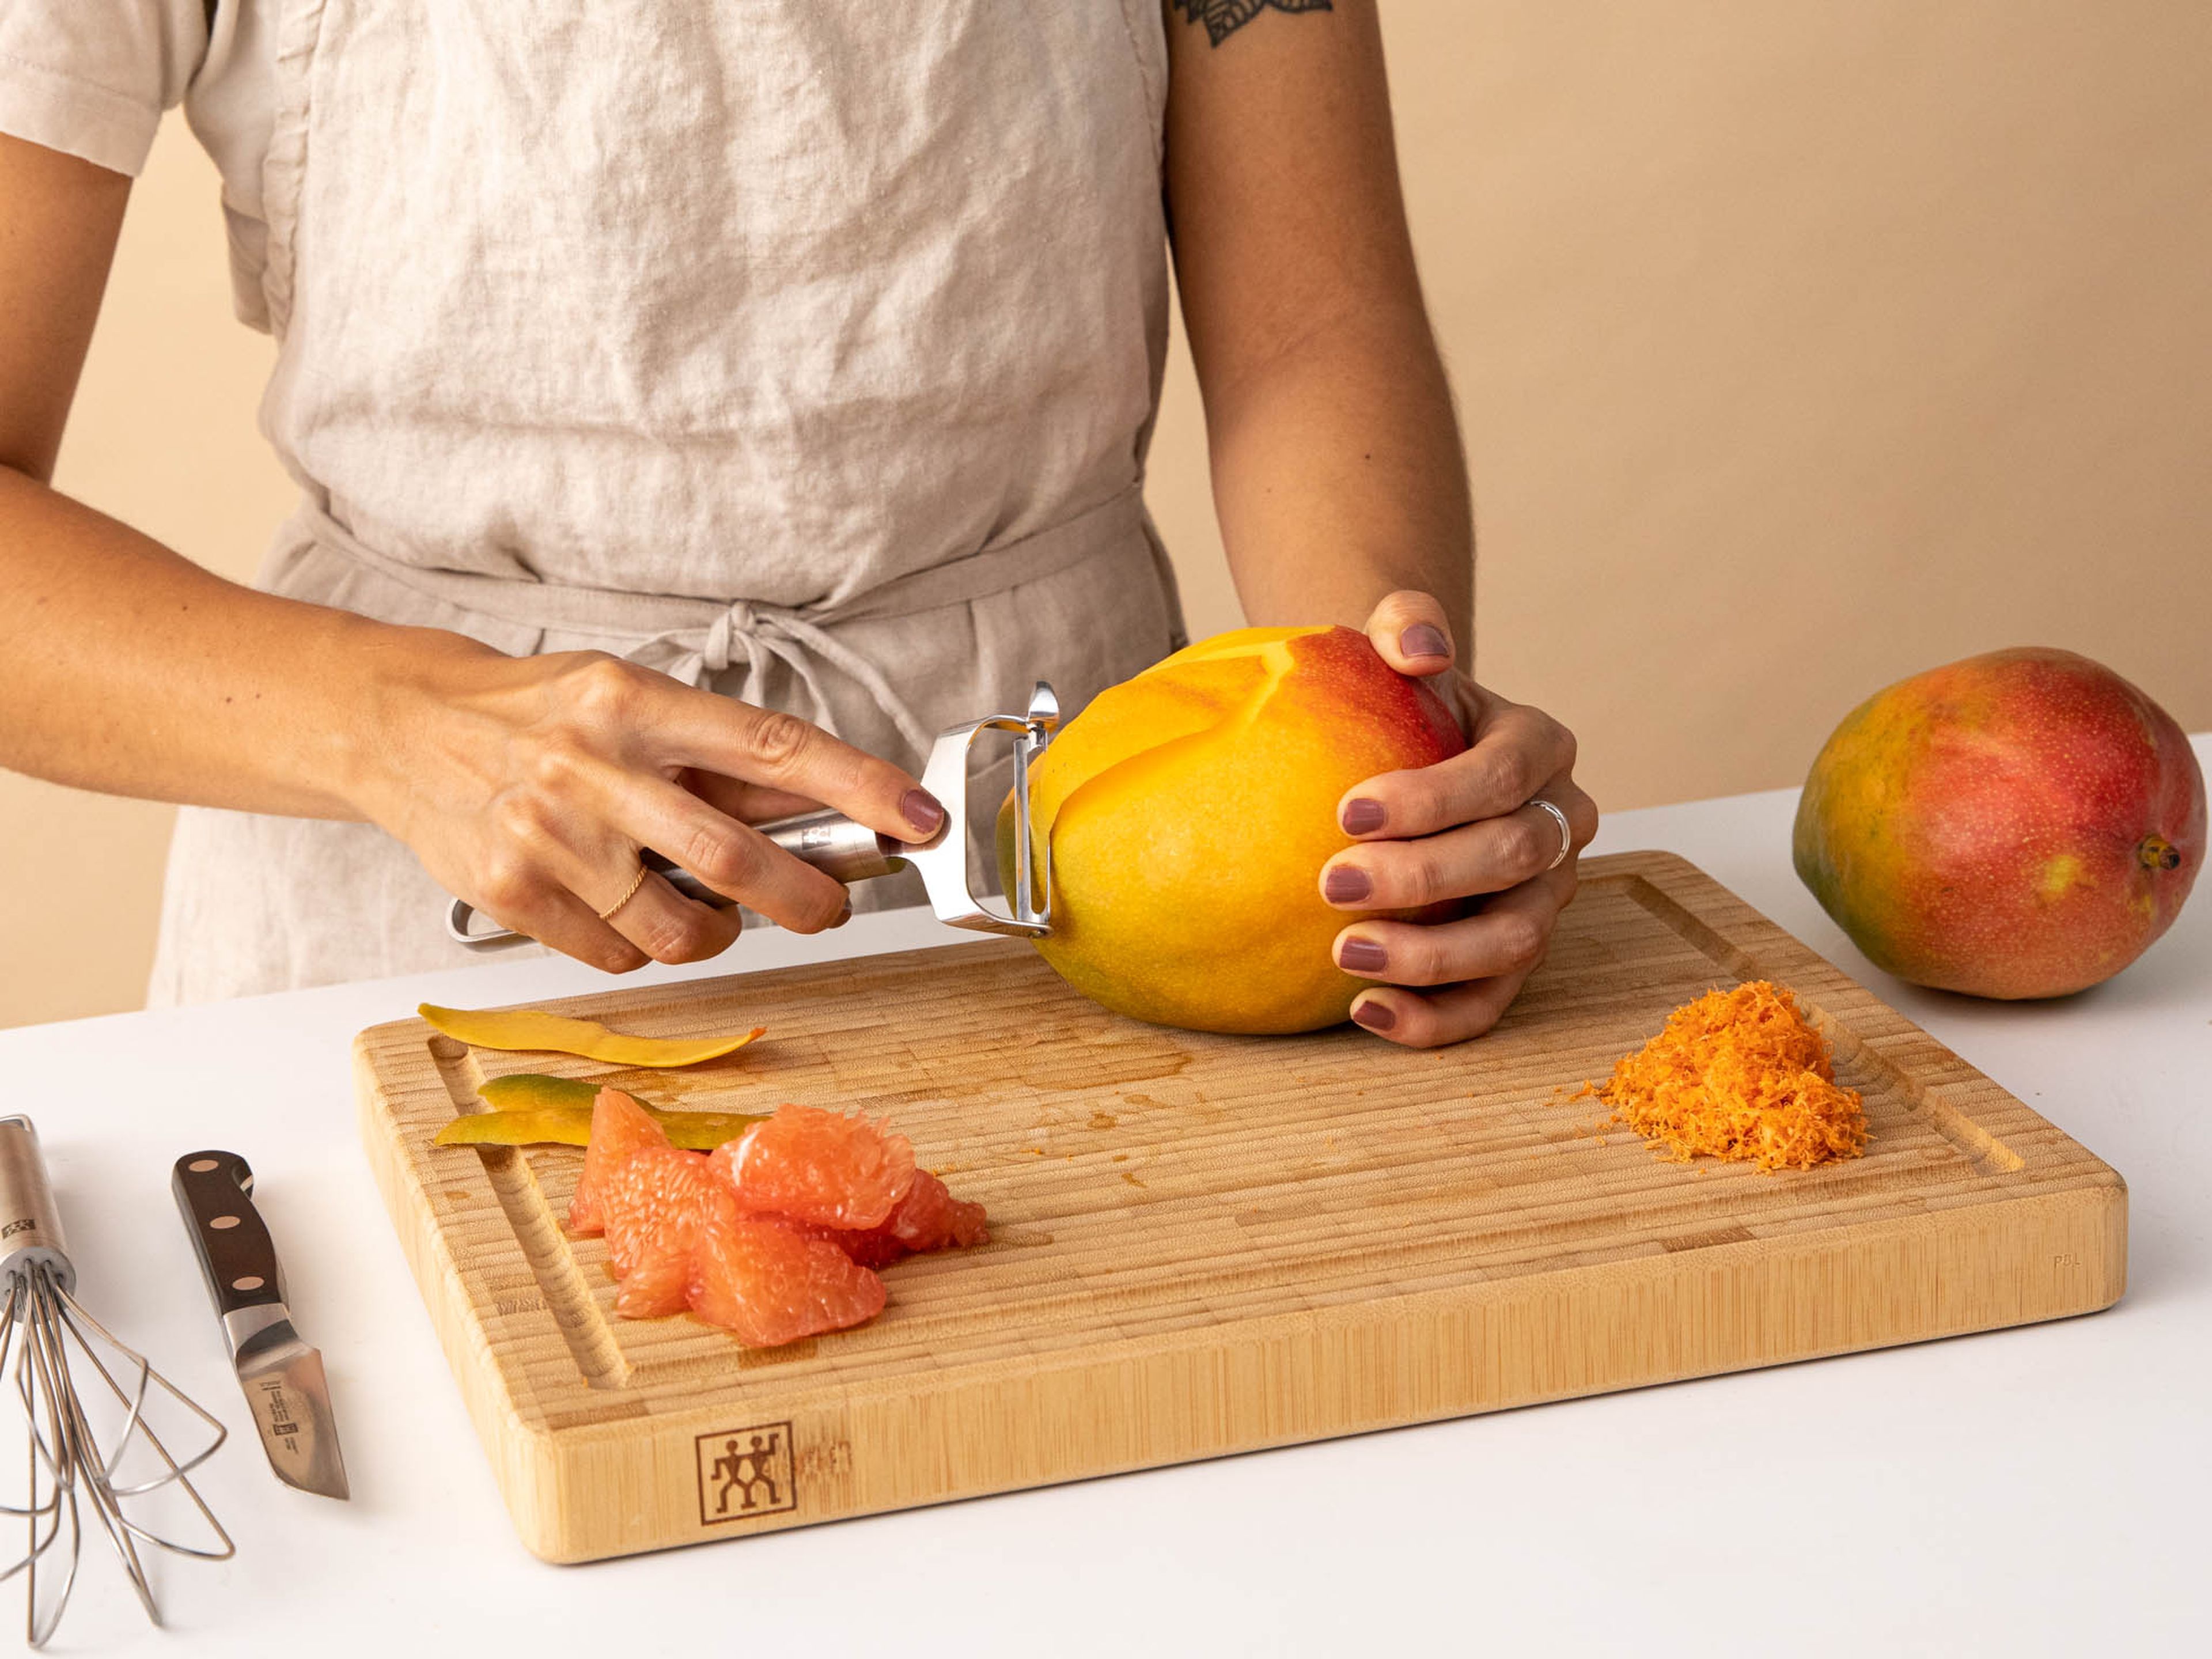 Peel mango and cut off mango cheeks. Slice thinly and transfer to a serving plate and pour chilled grapefruit syrup over the top. Garnish with grapefruit zest and reserved segments of grapefruit. Enjoy cold!